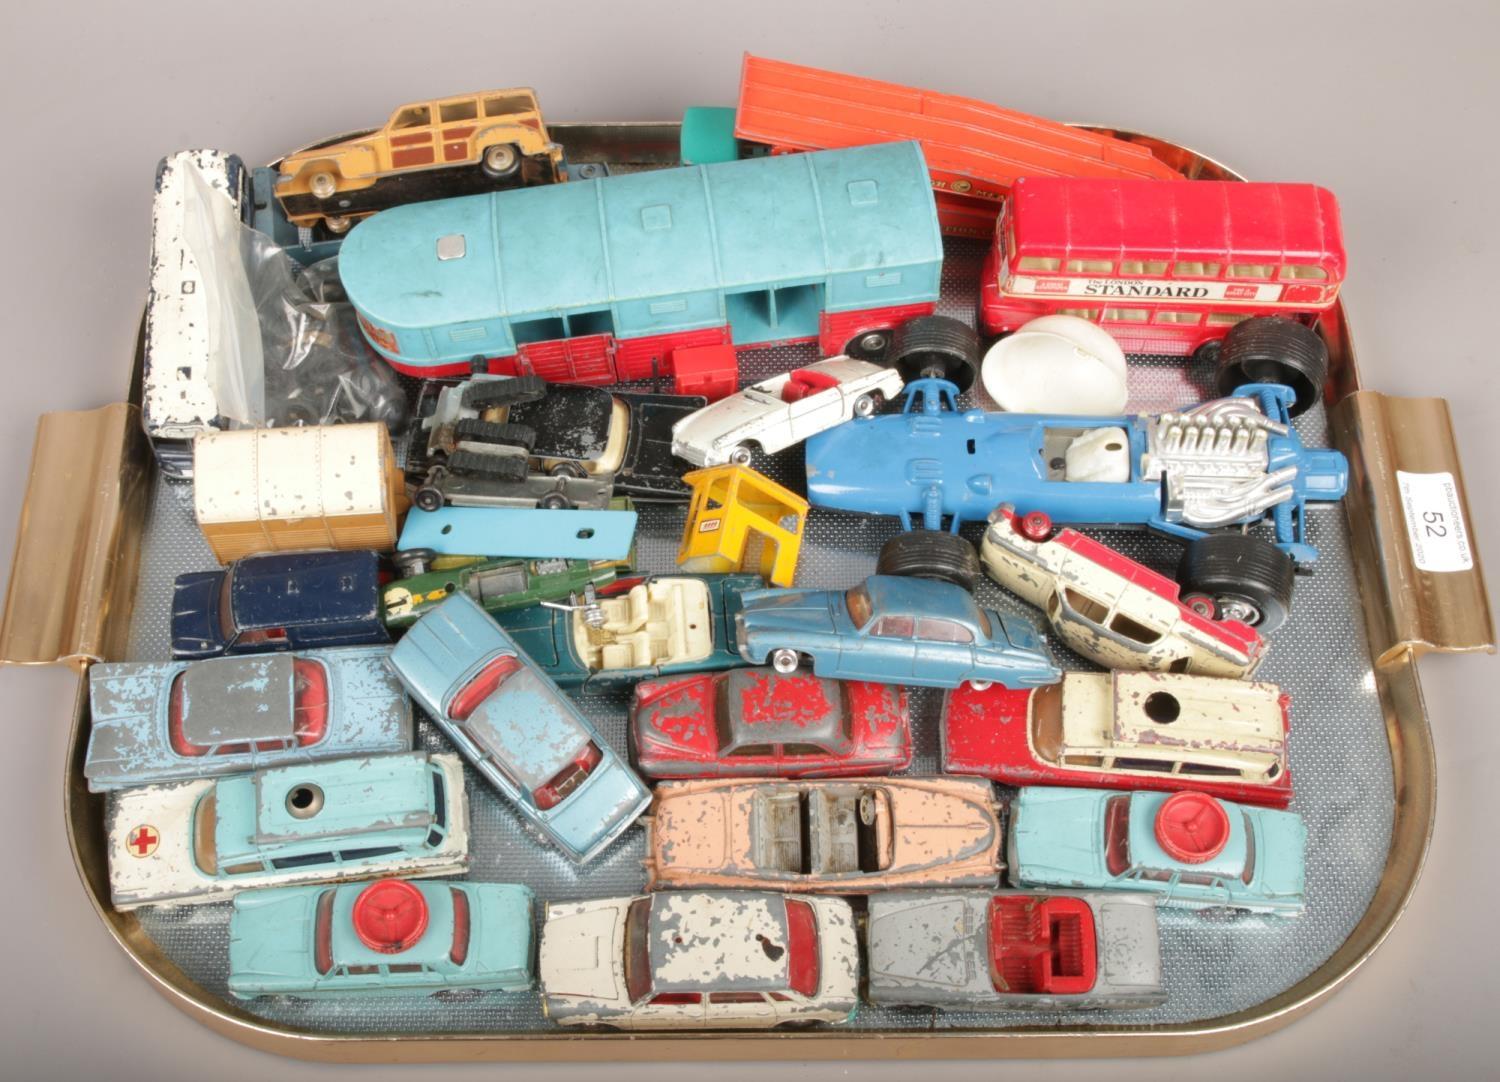 A tray of vintage die cast model vehicles and parts including Corgi and Dinky. Heavily play worn.